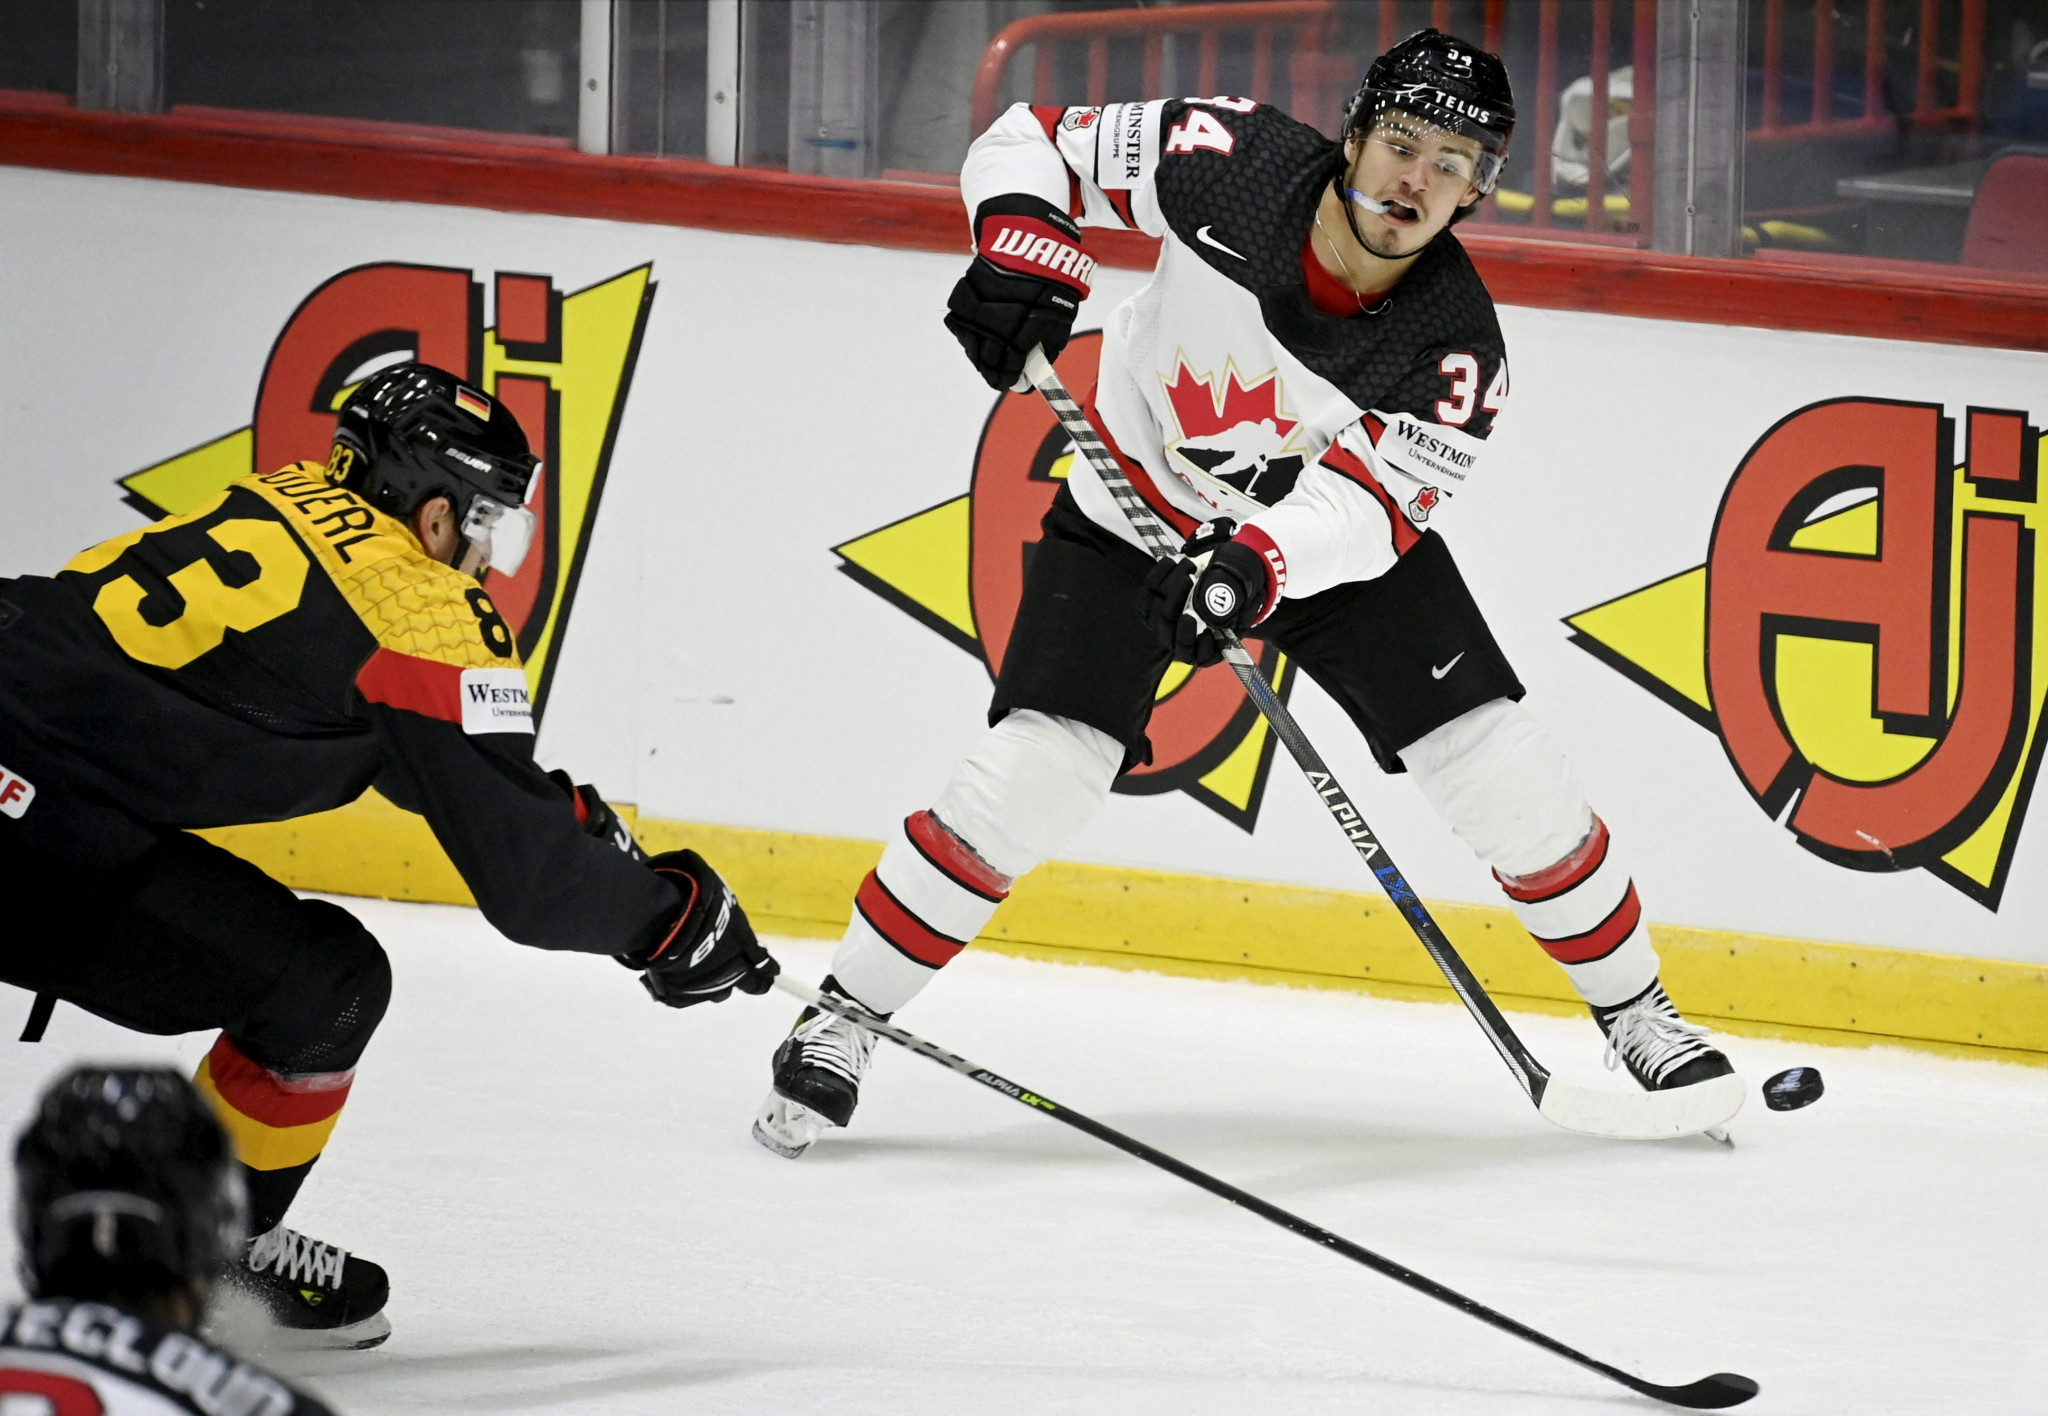 Canada beat Germany in their first match of the competition ©Getty Images